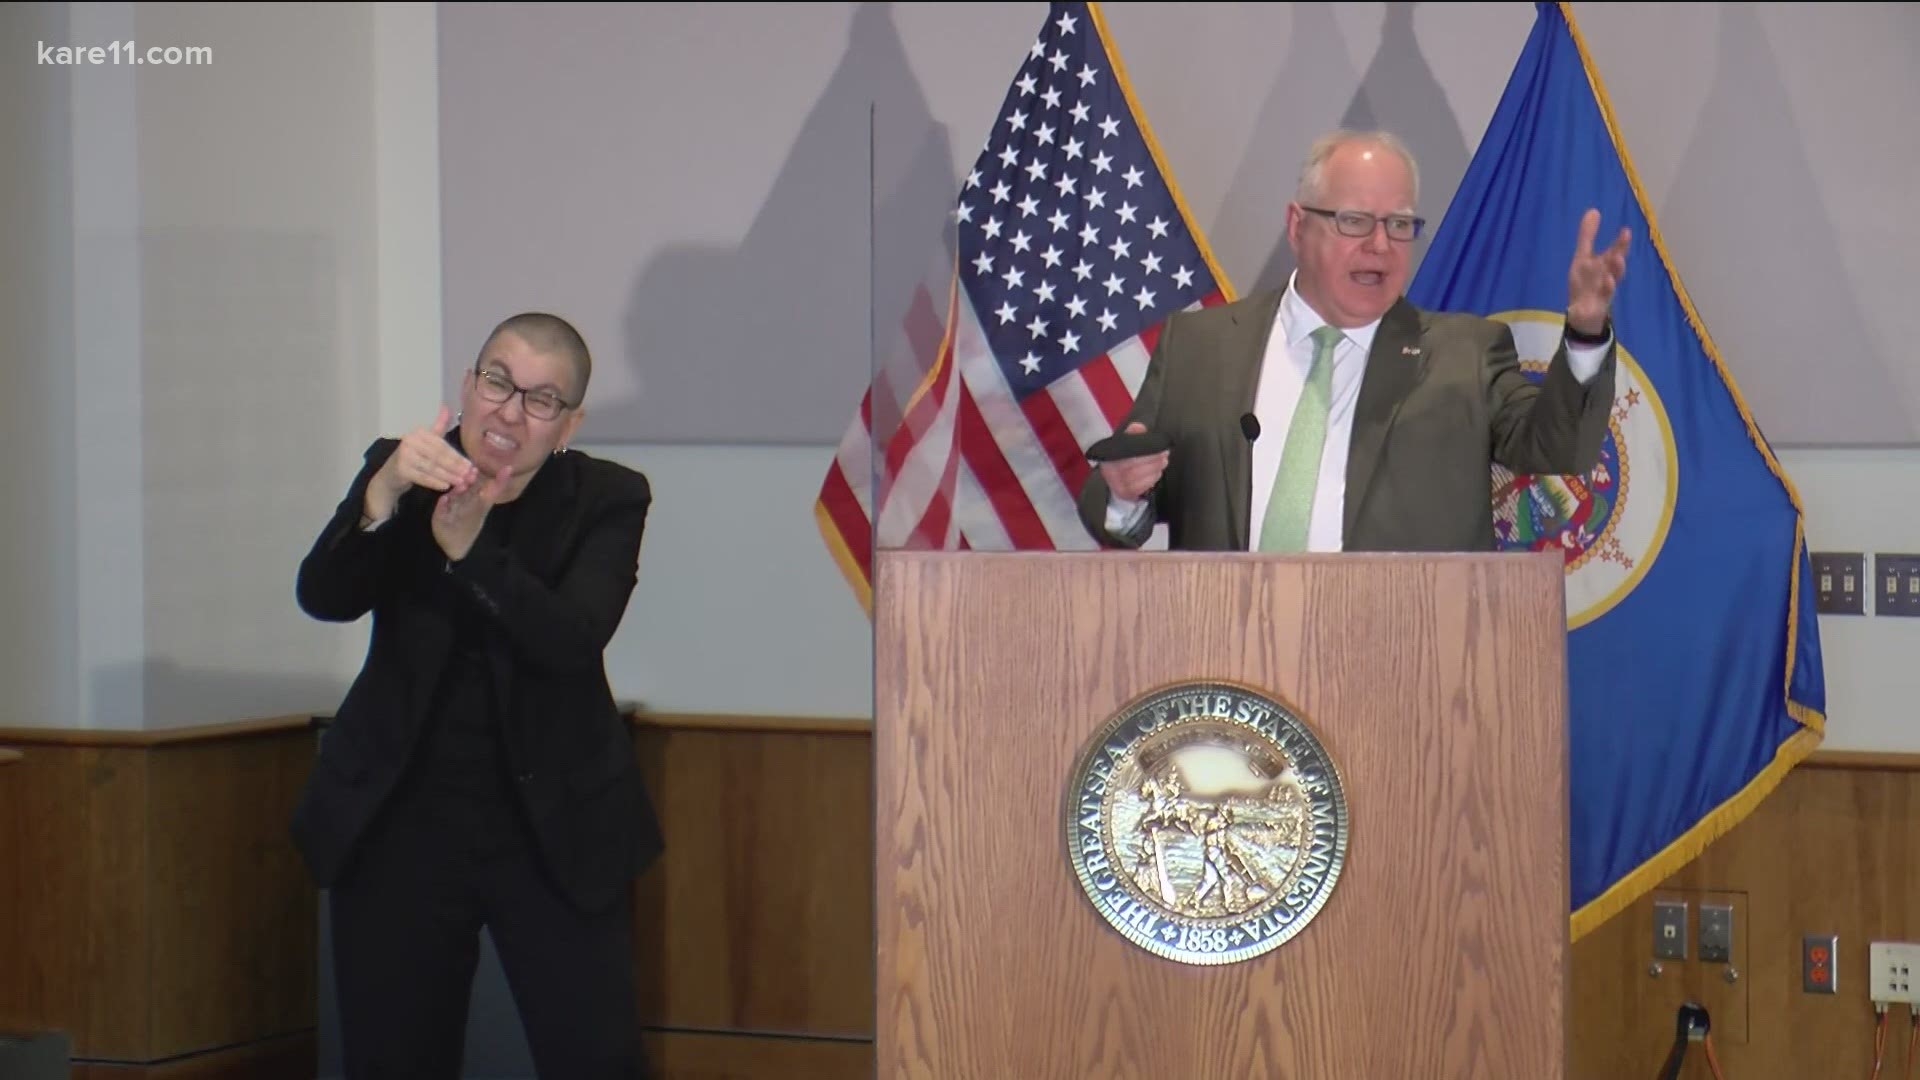 "This does not mean you're necessarily going to get this next week," Gov. Tim Walz said. "It means you're in line."